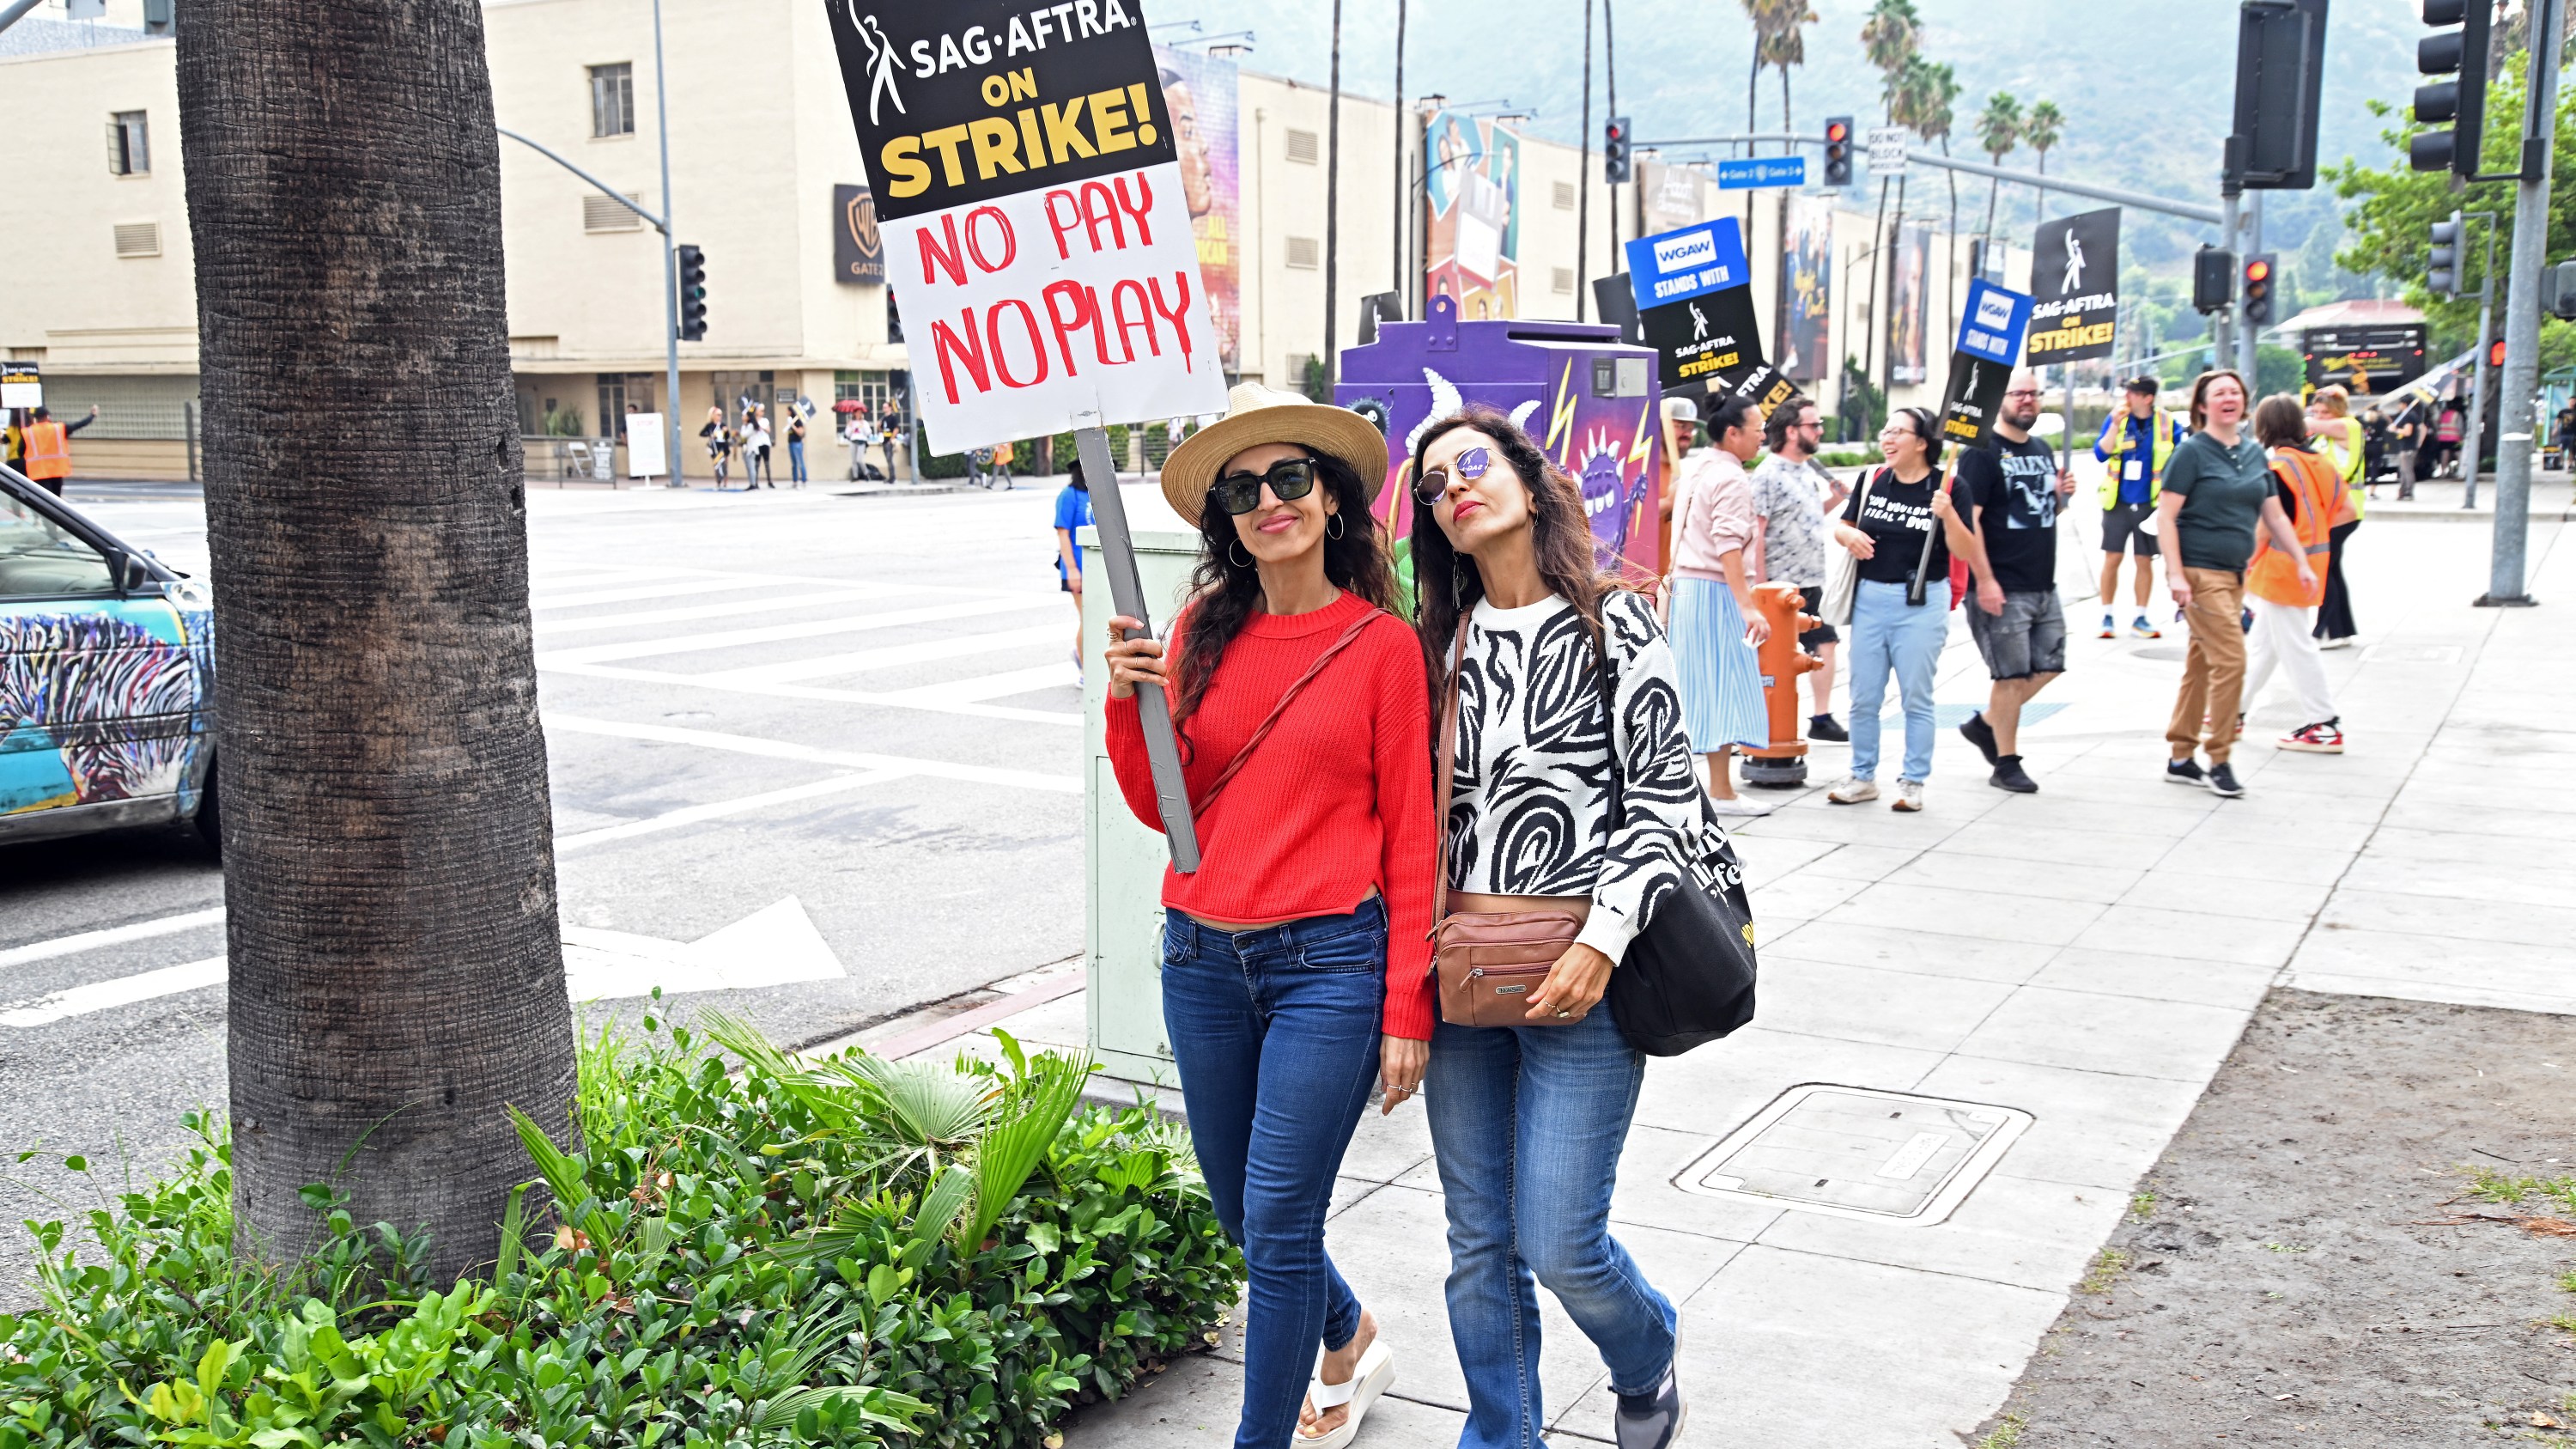 LOS ANGELES, CALIFORNIA - OCTOBER 10: A pair of striking actors attend the SAG-AFTRA picket lines on October 10, 2023 in Los Angeles, California. The WGA (Writers Guild of America) has reached a deal with Hollywood studios after 146 days on strike, ending their strike at midnight on September 27. Members of SAG-AFTRA and WGA (Writers Guild of America) walked out in their first joint strike against the studios since 1960, shutting down a majority of Hollywood productions. SAG-AFTRA has not reached a deal with the studios and has been on strike since July 14. (Photo by Michael Tullberg/Getty Images)